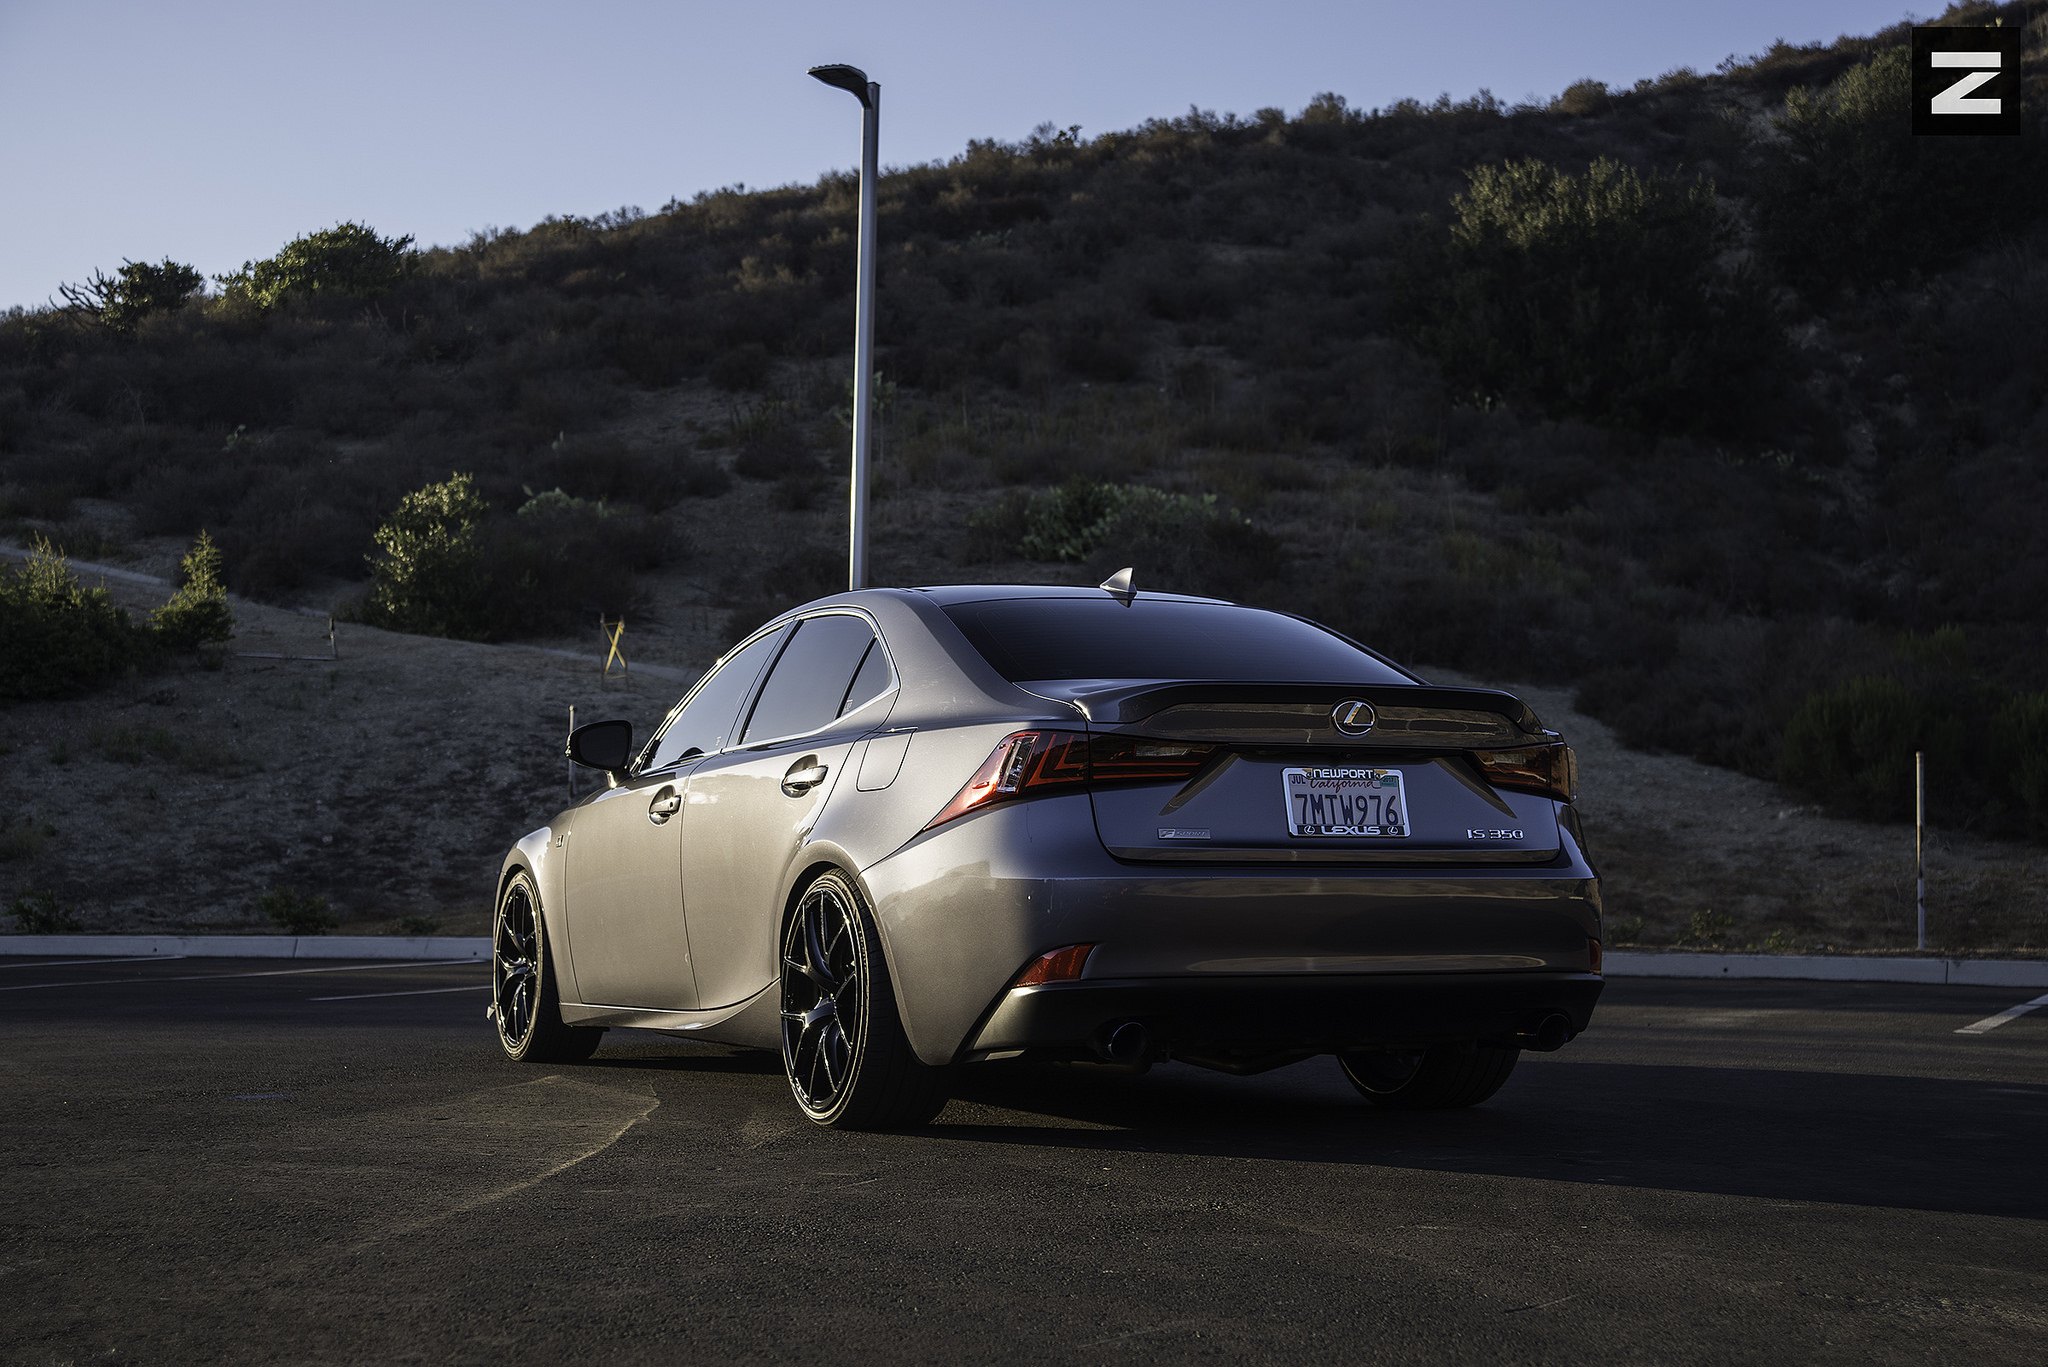 Aftermarket Rear Diffuser on Gray Lexus IS - Photo by Zito Wheels